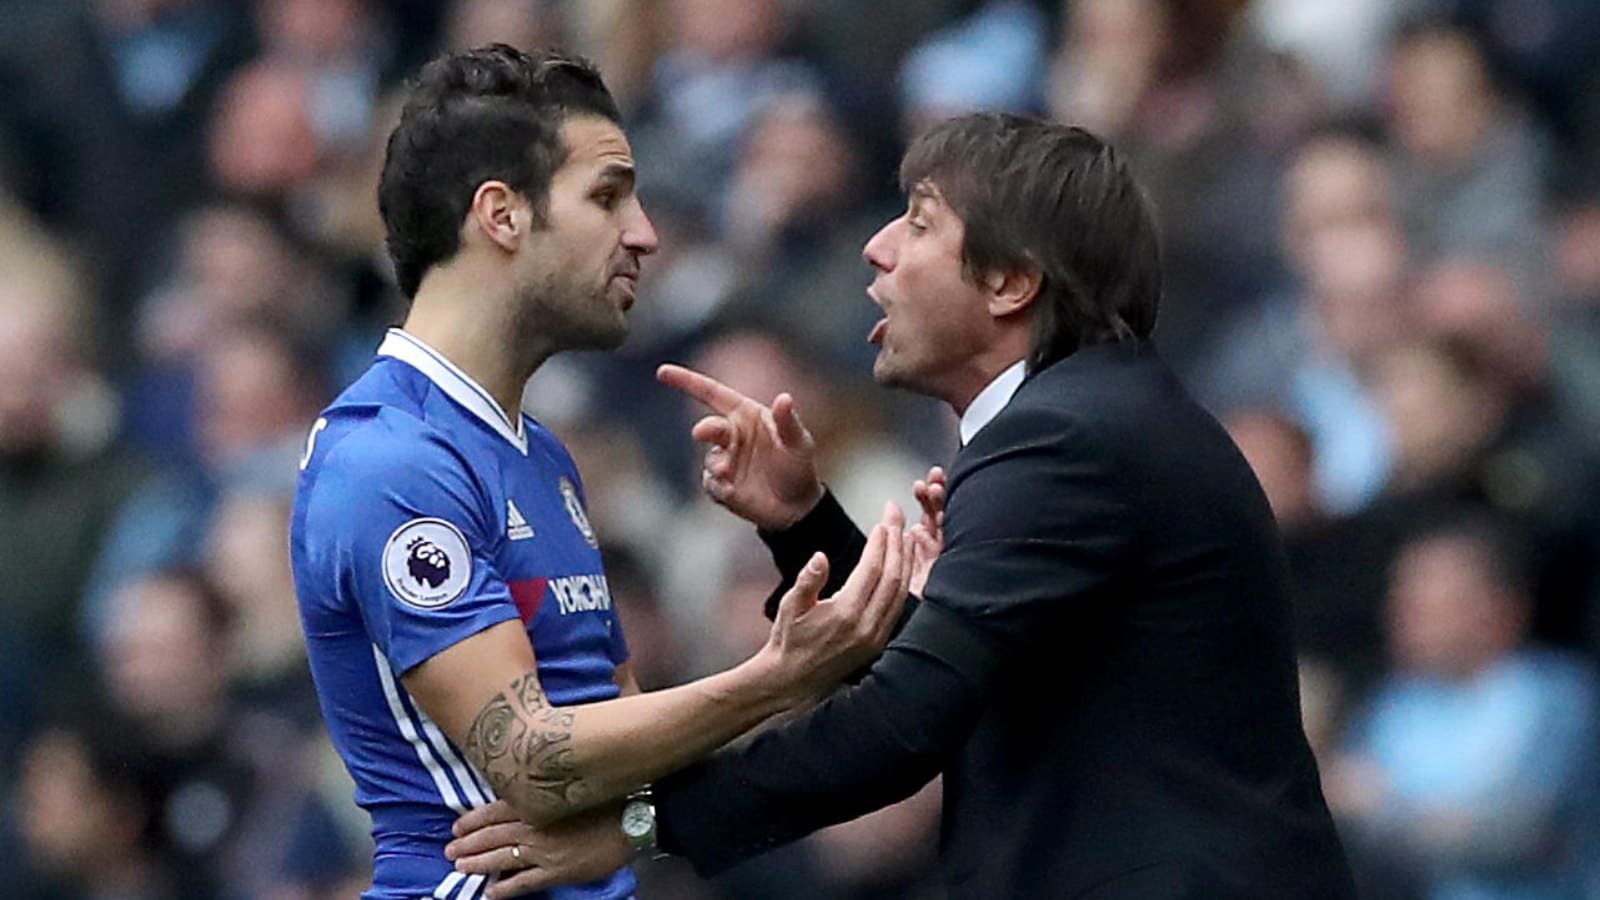 Fabregas urges Lampard to imitate Hiddink at Chelsea to prepare for ‘feasible’ title under Poch